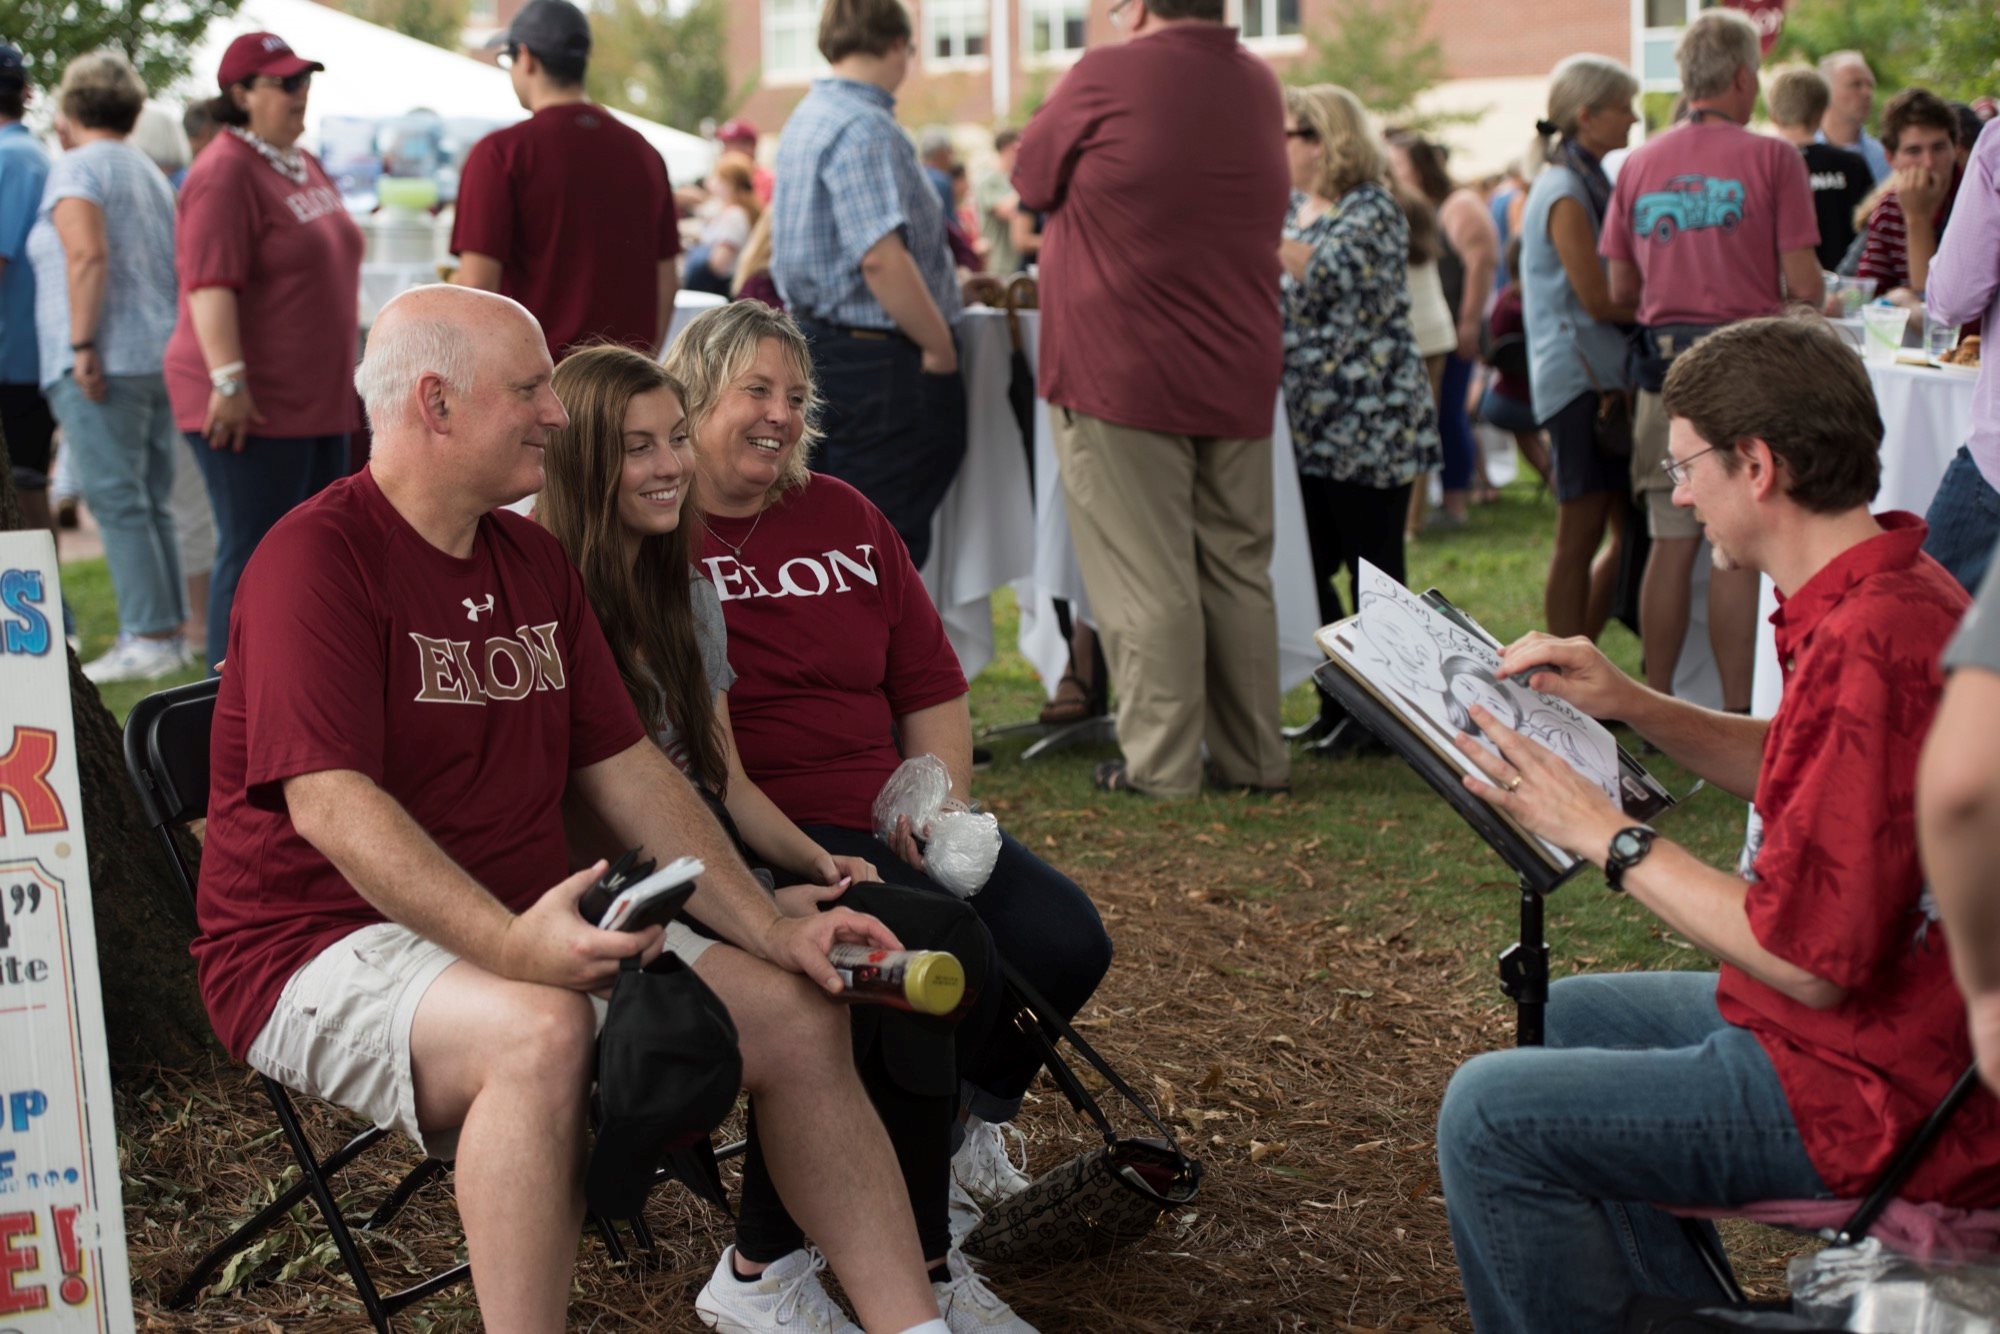 Family Weekend and 2018 dates announced Today at Elon